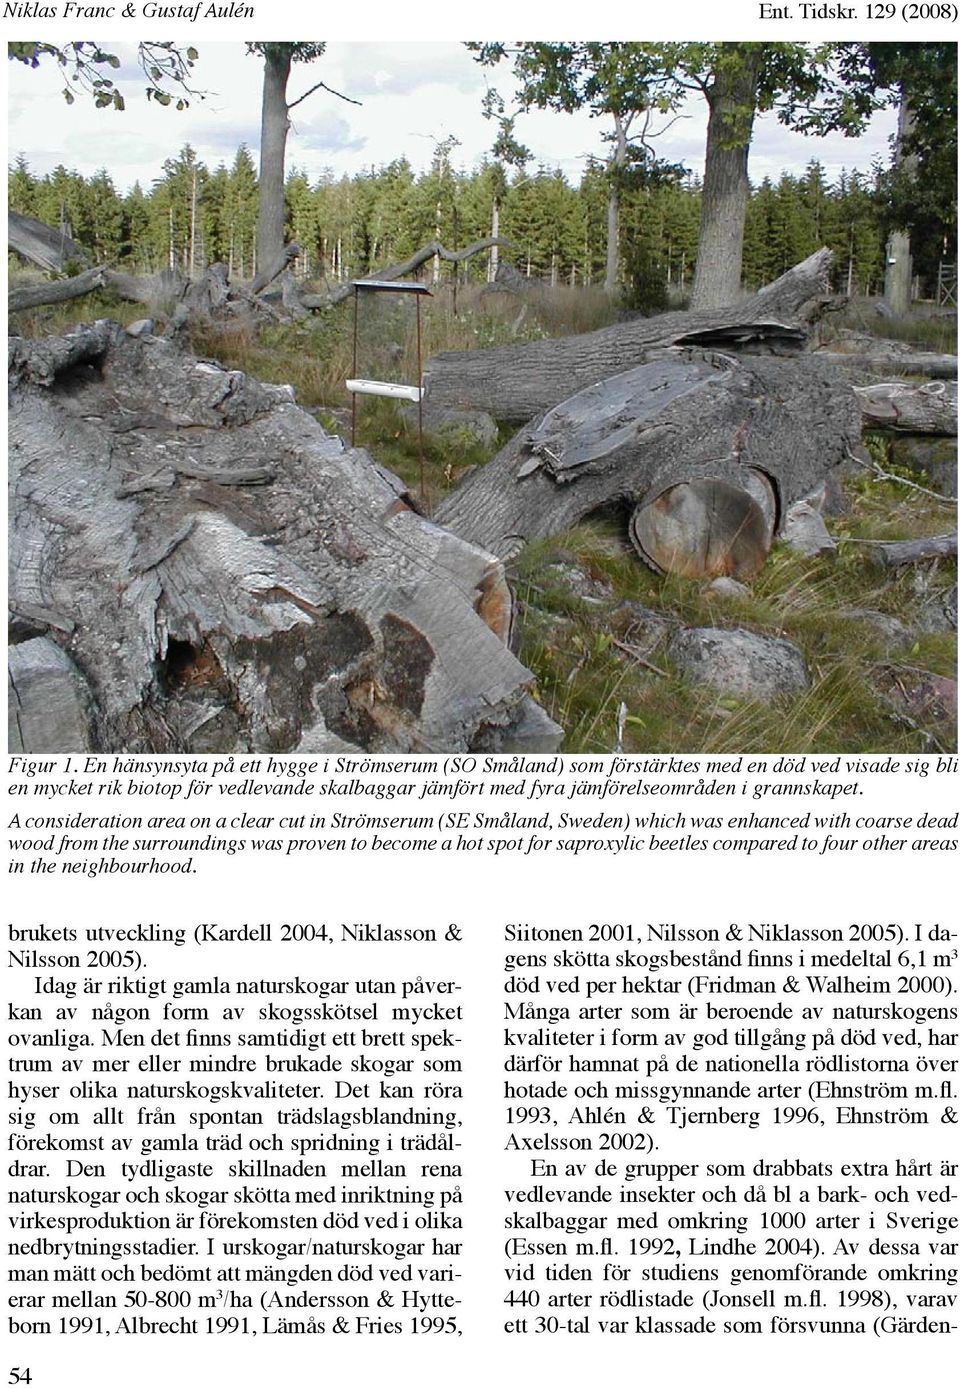 A consideration area on a clear cut in Strömserum (SE Småland, Sweden) which was enhanced with coarse dead wood from the surroundings was proven to become a hot spot for saproylic beetles compared to